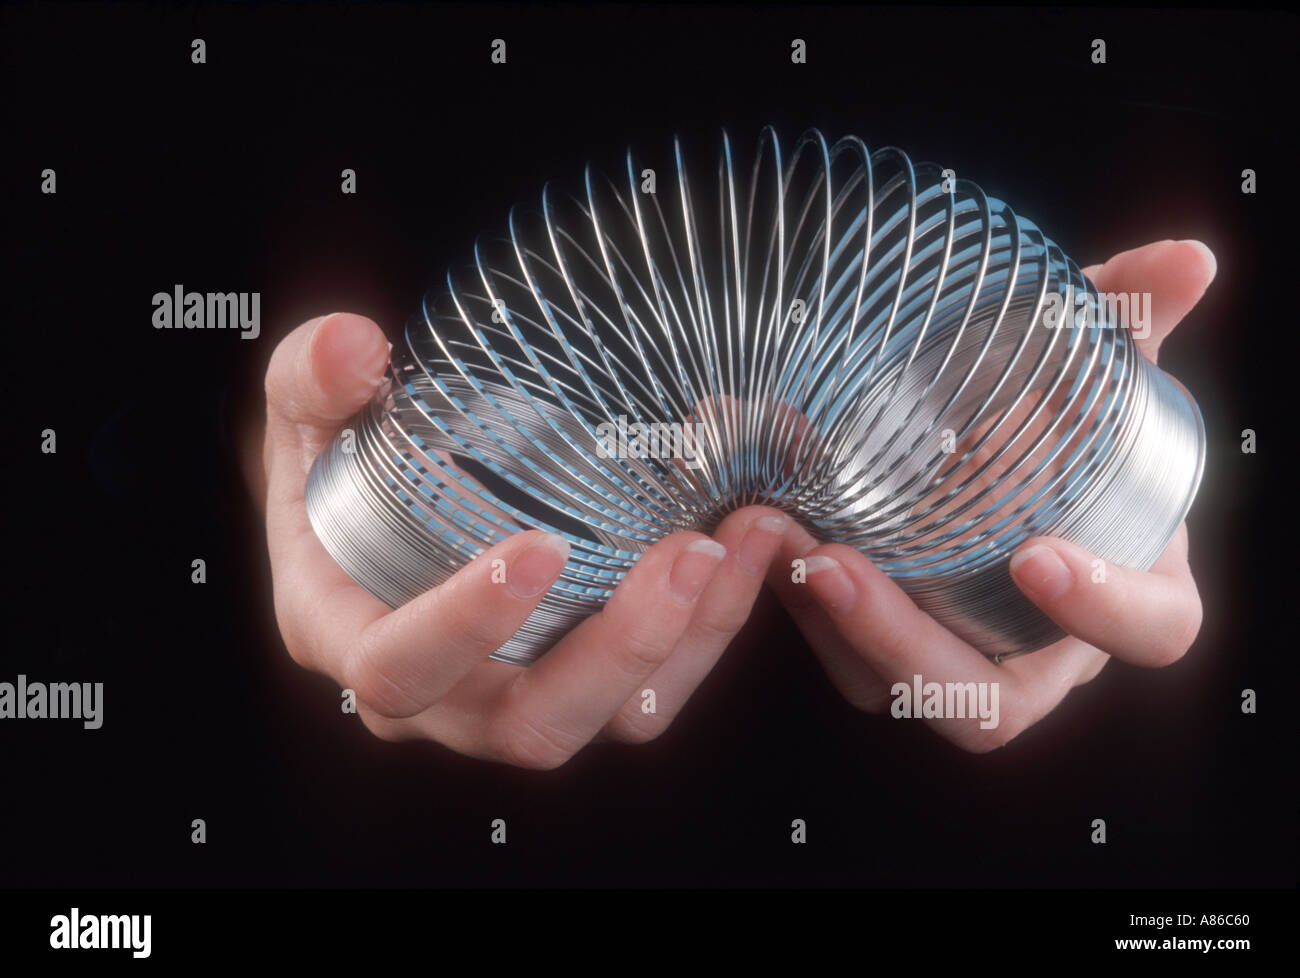 hands holding a slinky toy Stock Photo